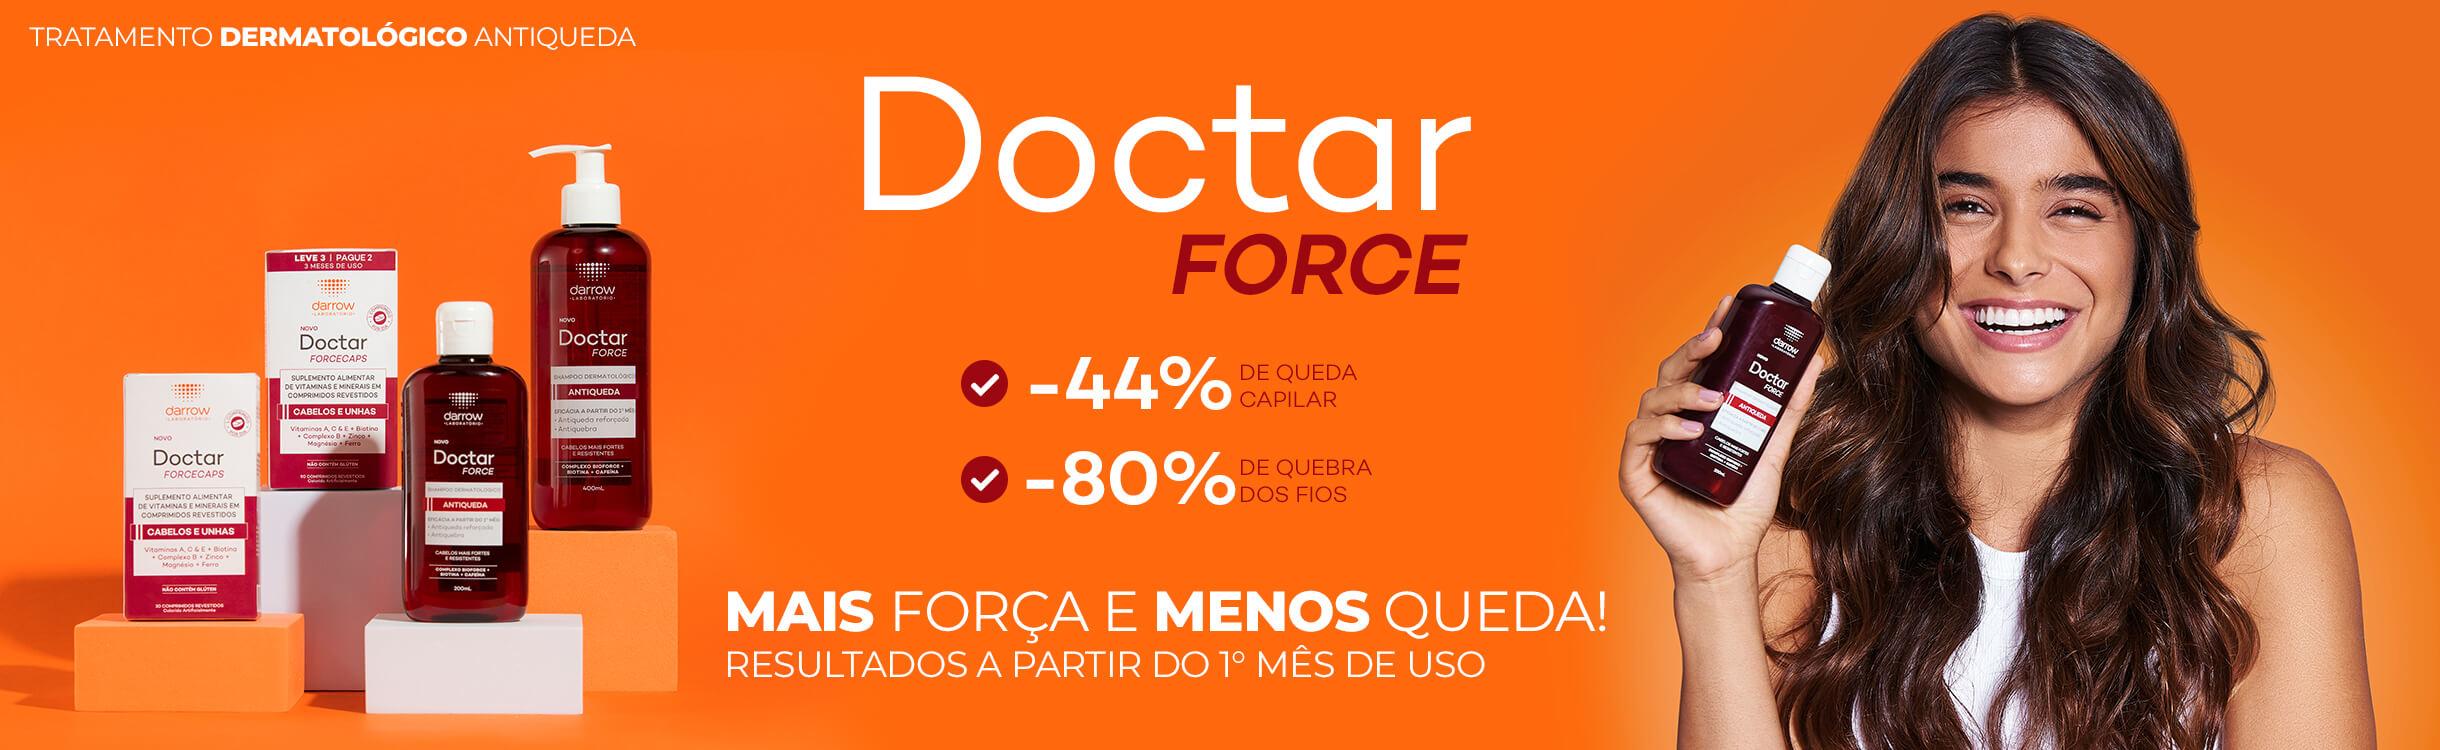 Doctar Force